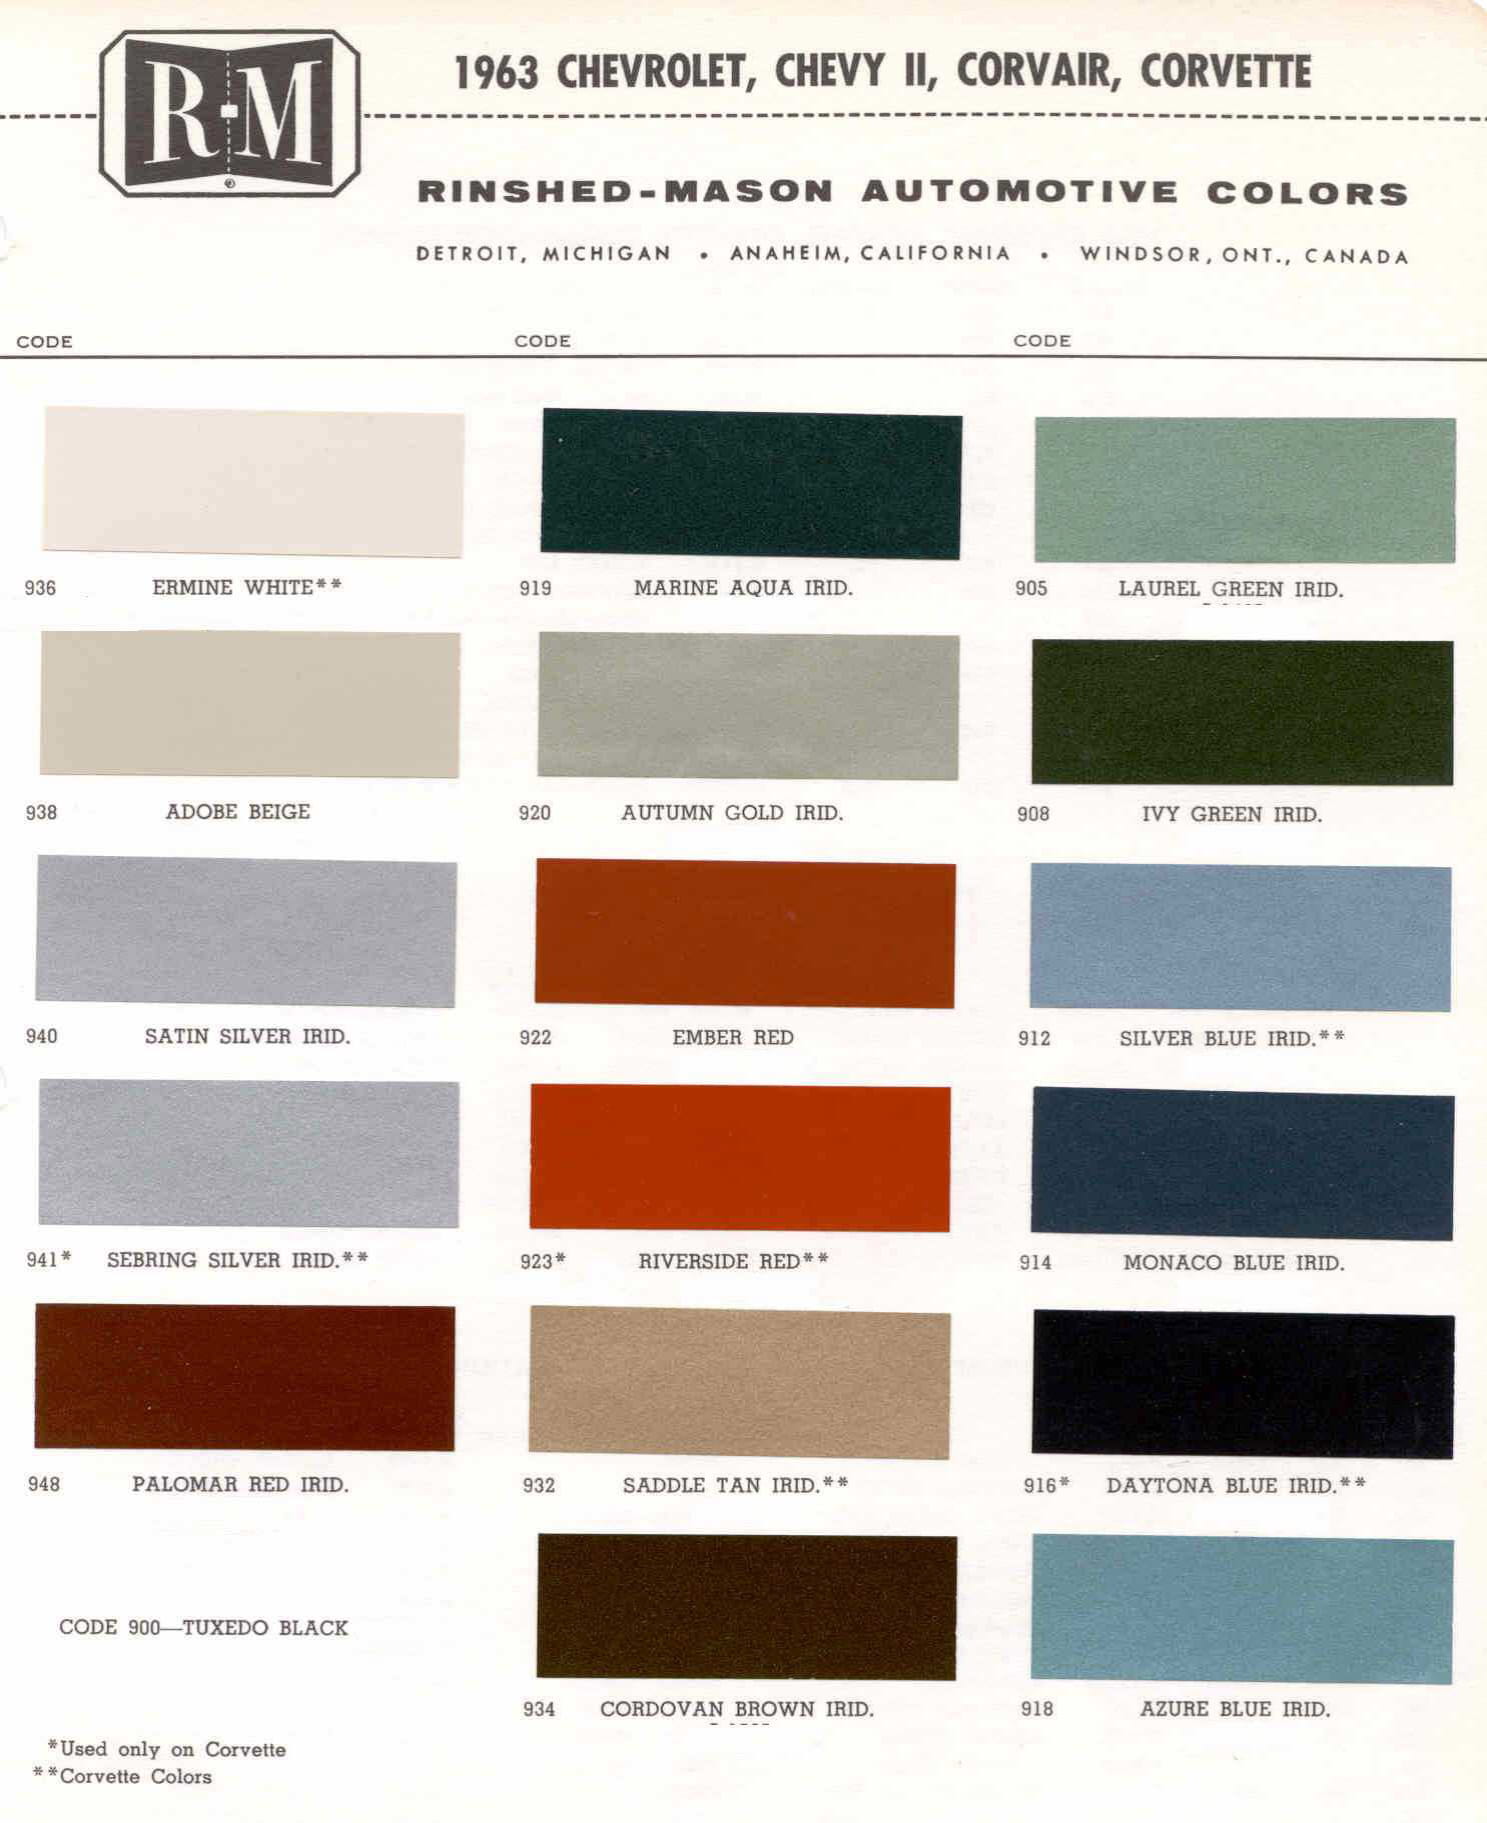 Paint color examples, their ordering codes, the oem color code, and vehicles the coPaint color examples, their ordering codes, the oem color code, and vehicles the color was used onlor was used on